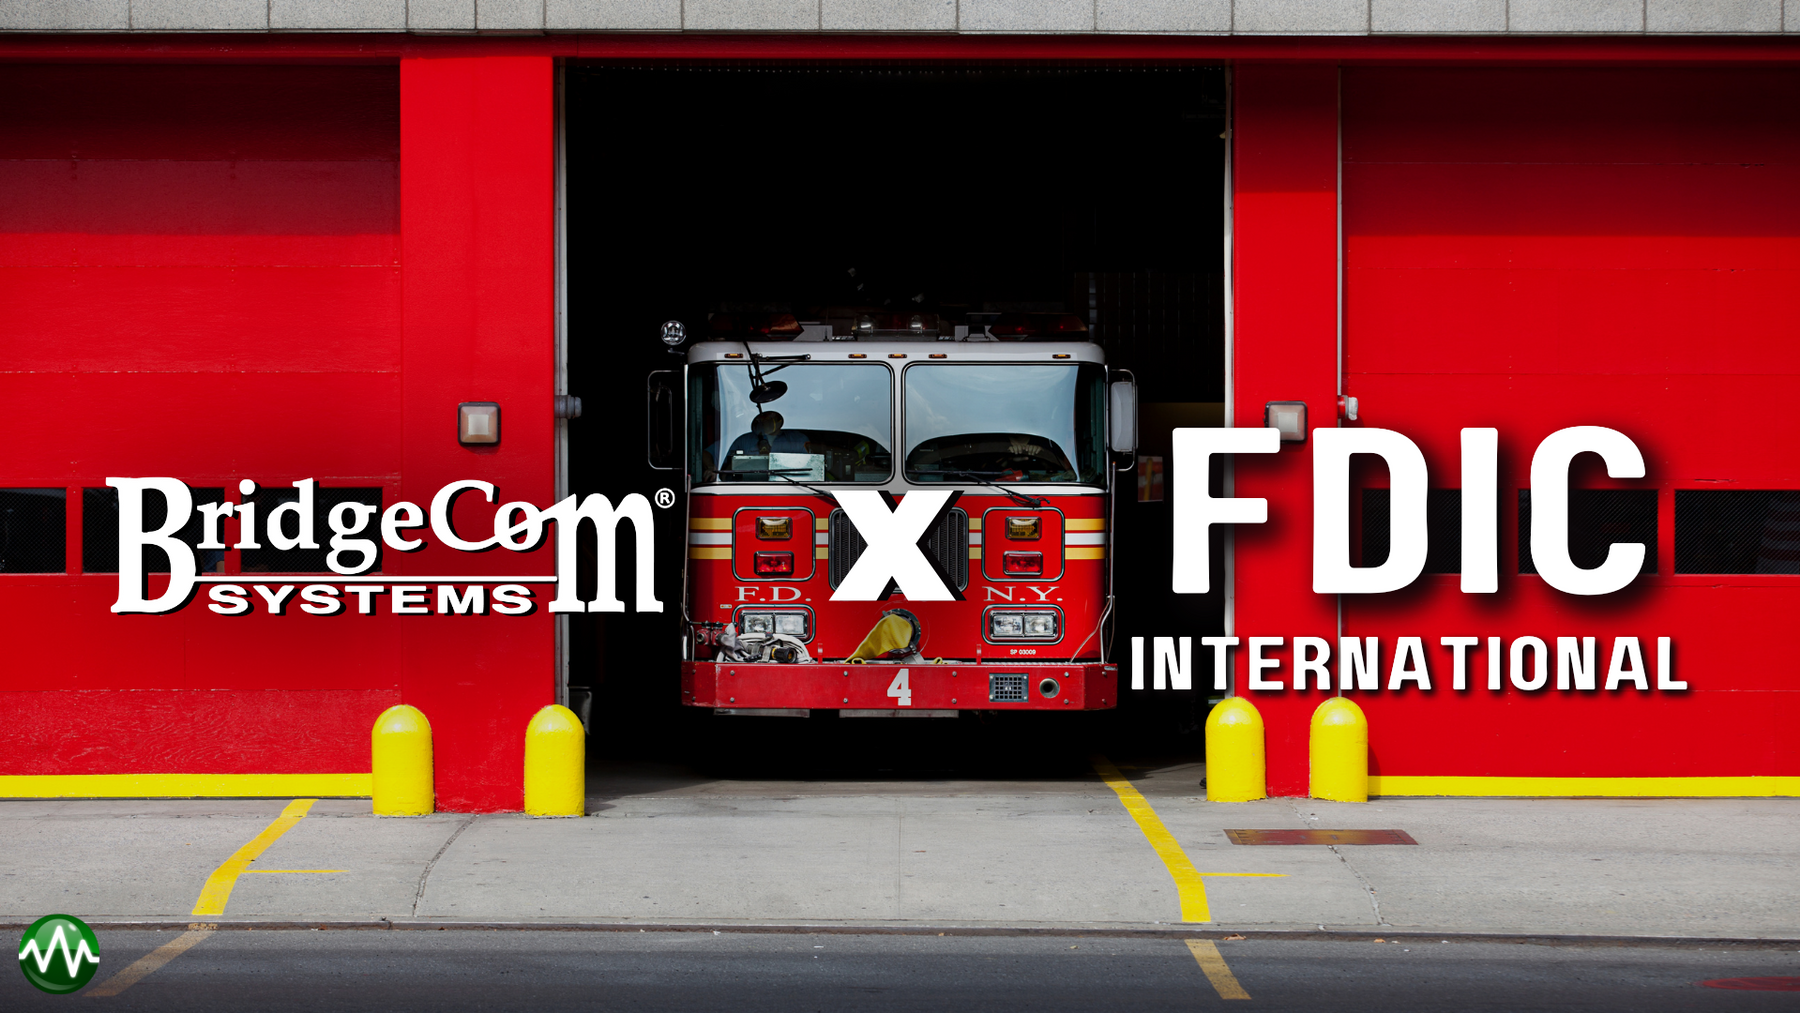 BridgeCom Systems to Showcase Dual-Band VHF/UHF Two-Way Radios for Fire and Rescue Professionals at FDIC, Booth #1207